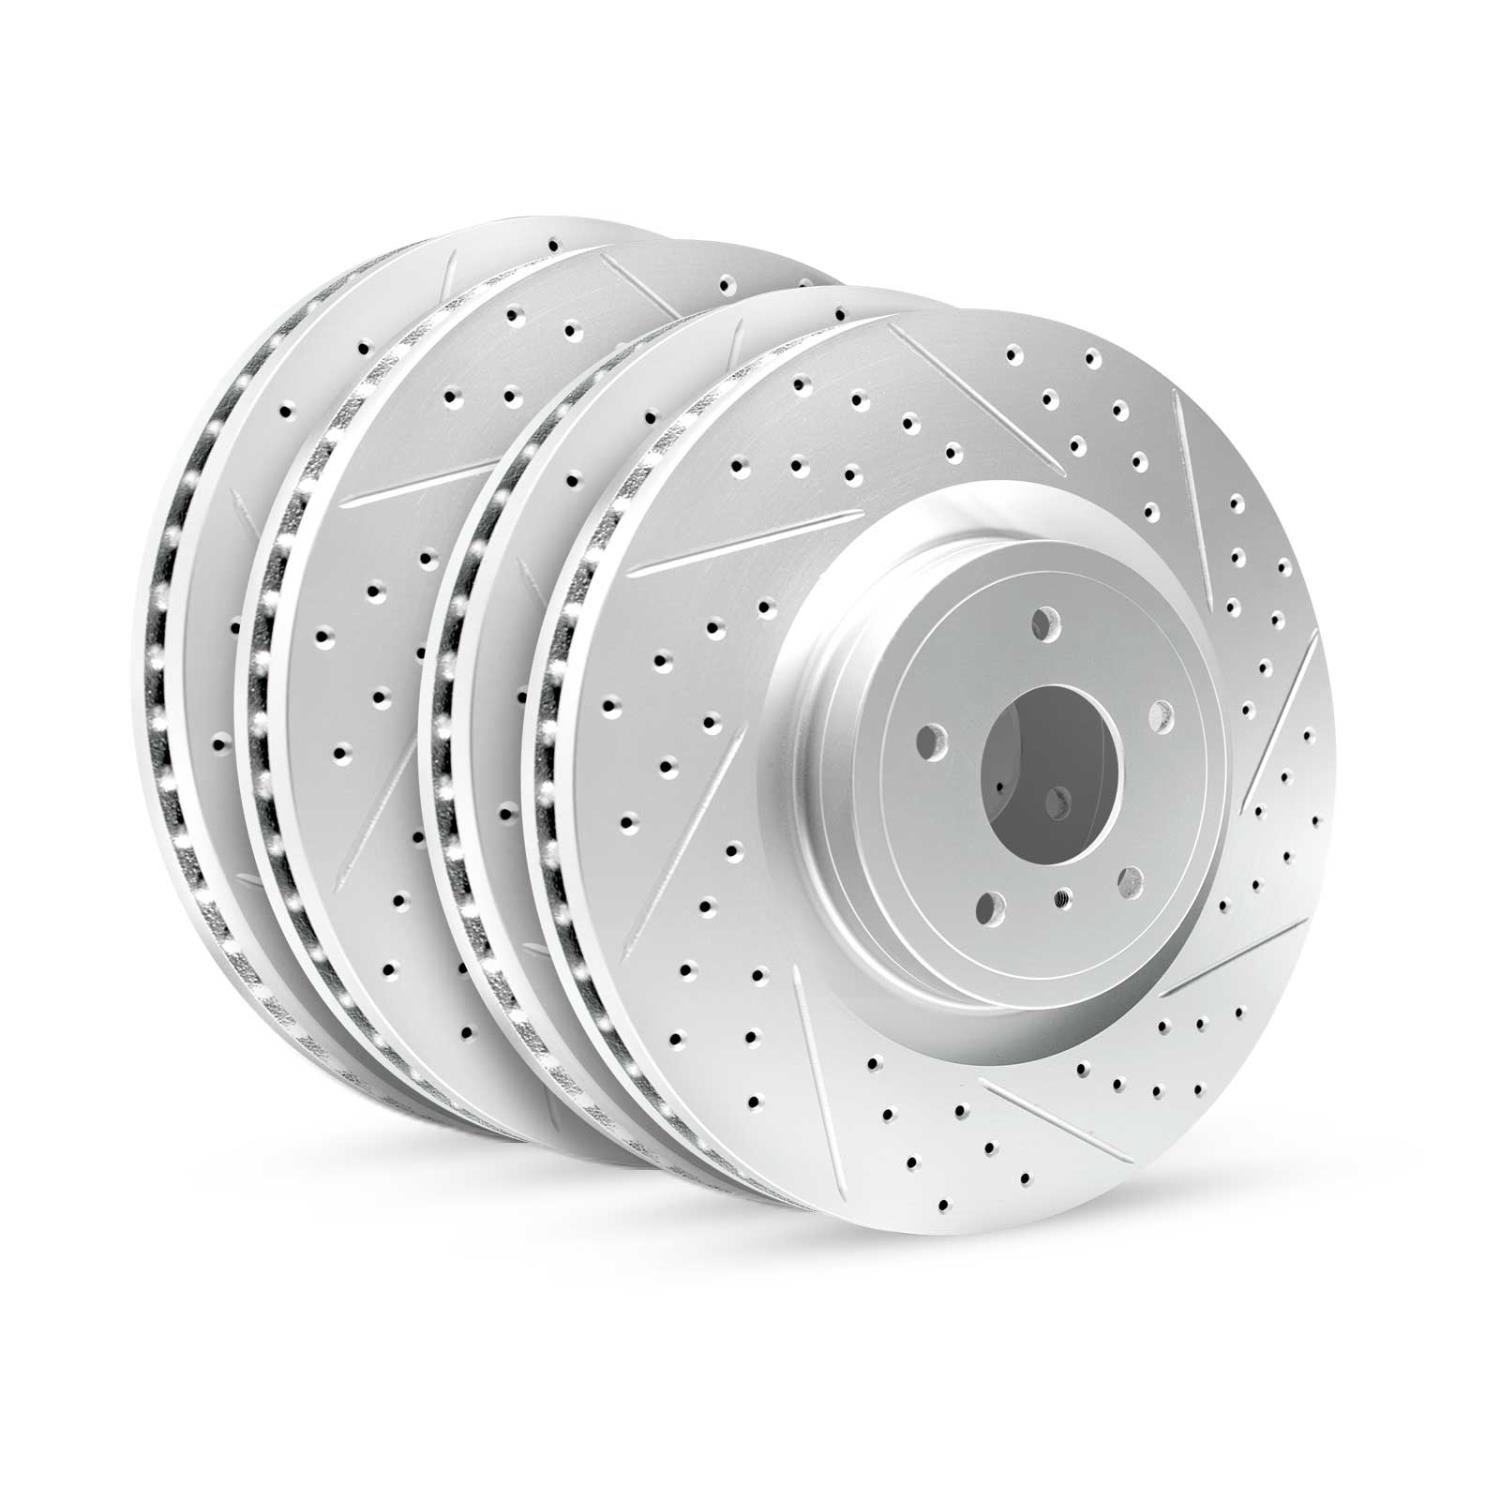 GEO-Carbon Drilled/Slotted Rotors, 2009-2018 Fits Multiple